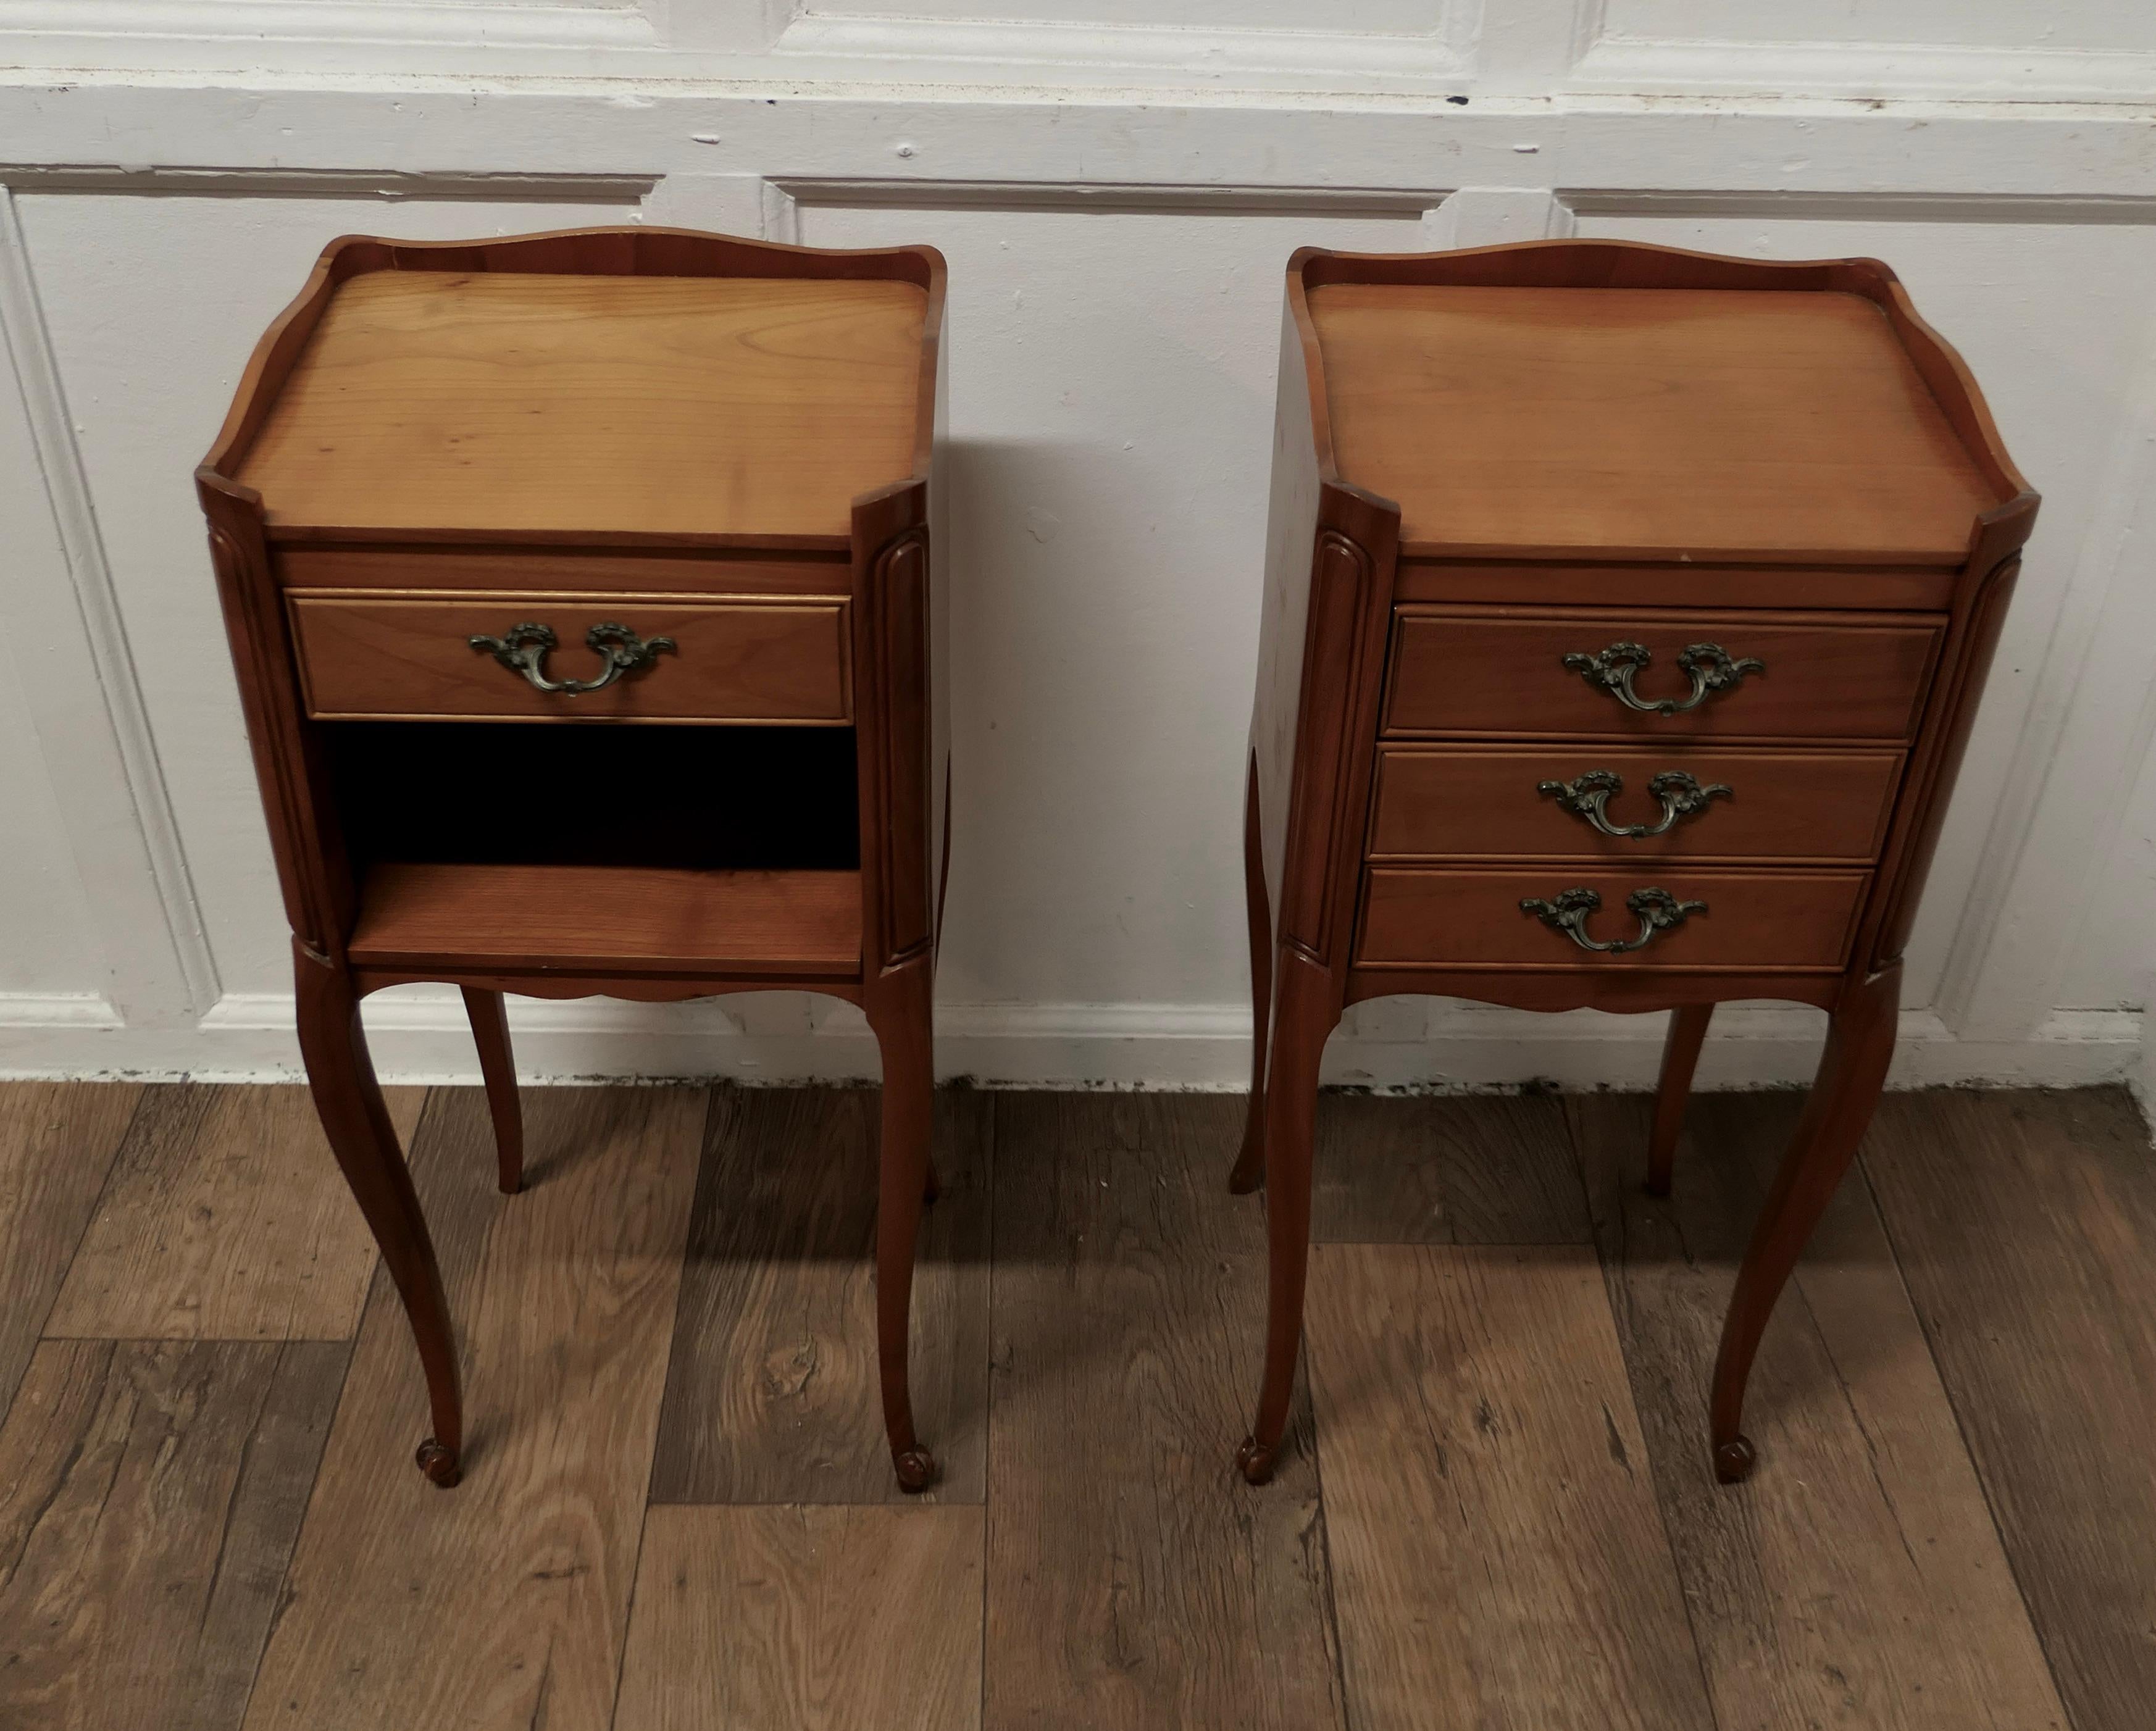 Pair of Petite French Cherry Wood Bedside Cabinets or Tables    In Good Condition For Sale In Chillerton, Isle of Wight